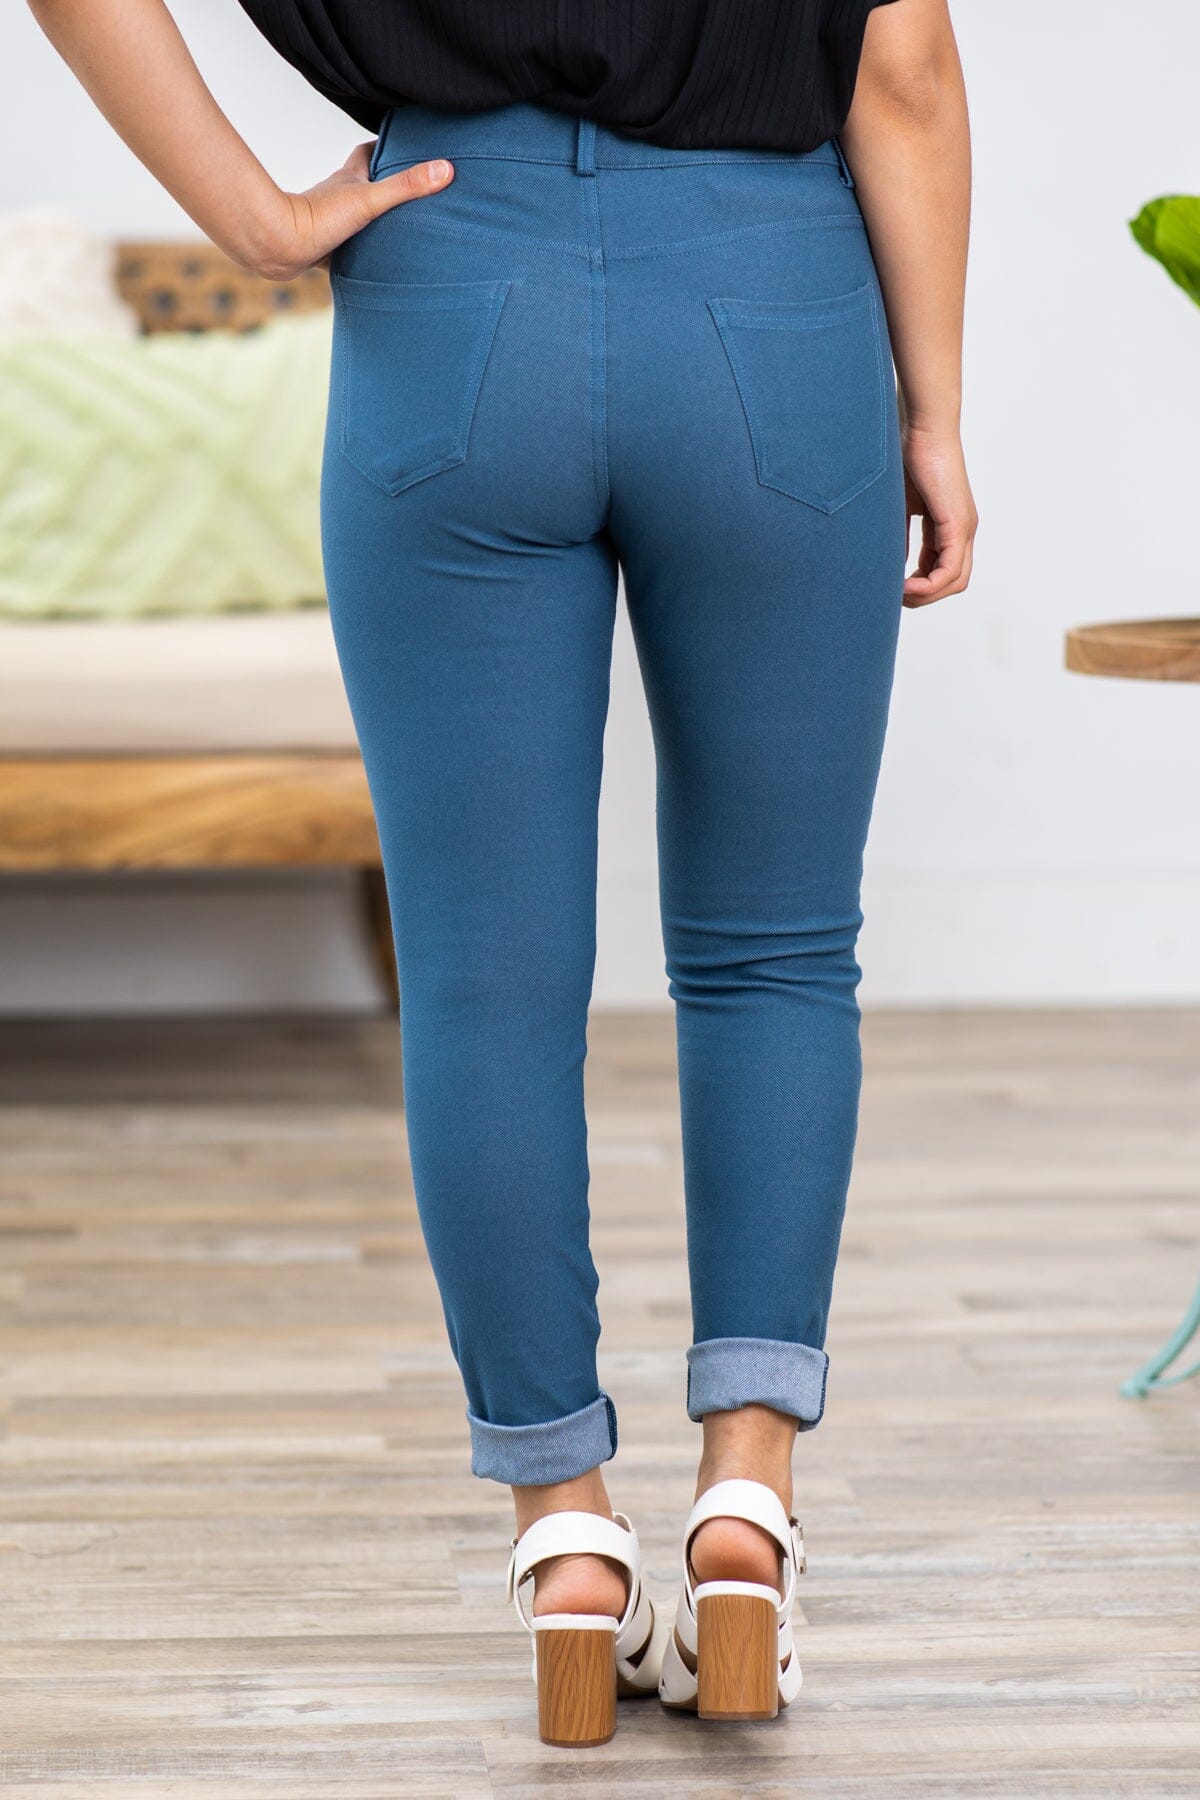 Teal Skinny Fit Jeggings - Filly Flair